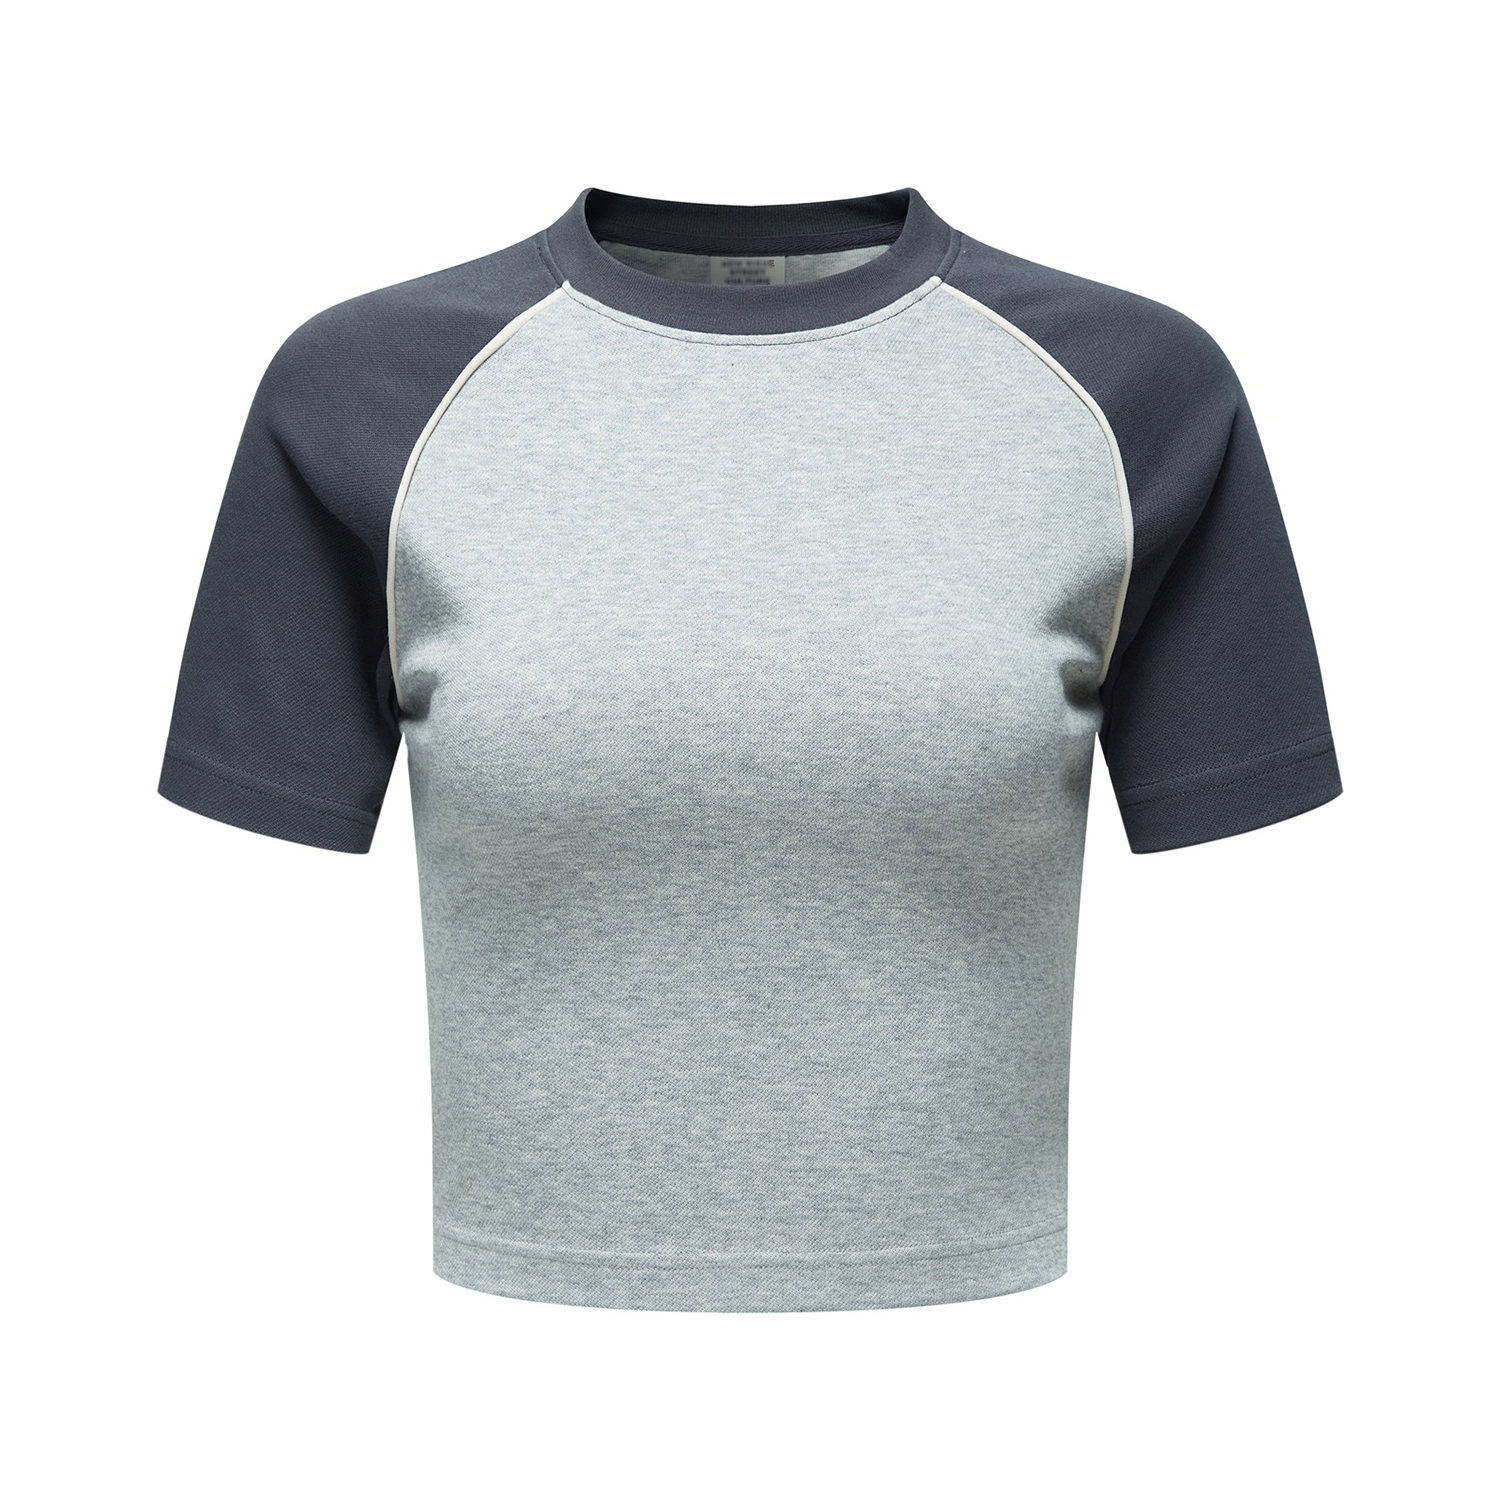 Streetwear Vintage Colorblock Fitted Cropped Gray Tee | HugePOD-3